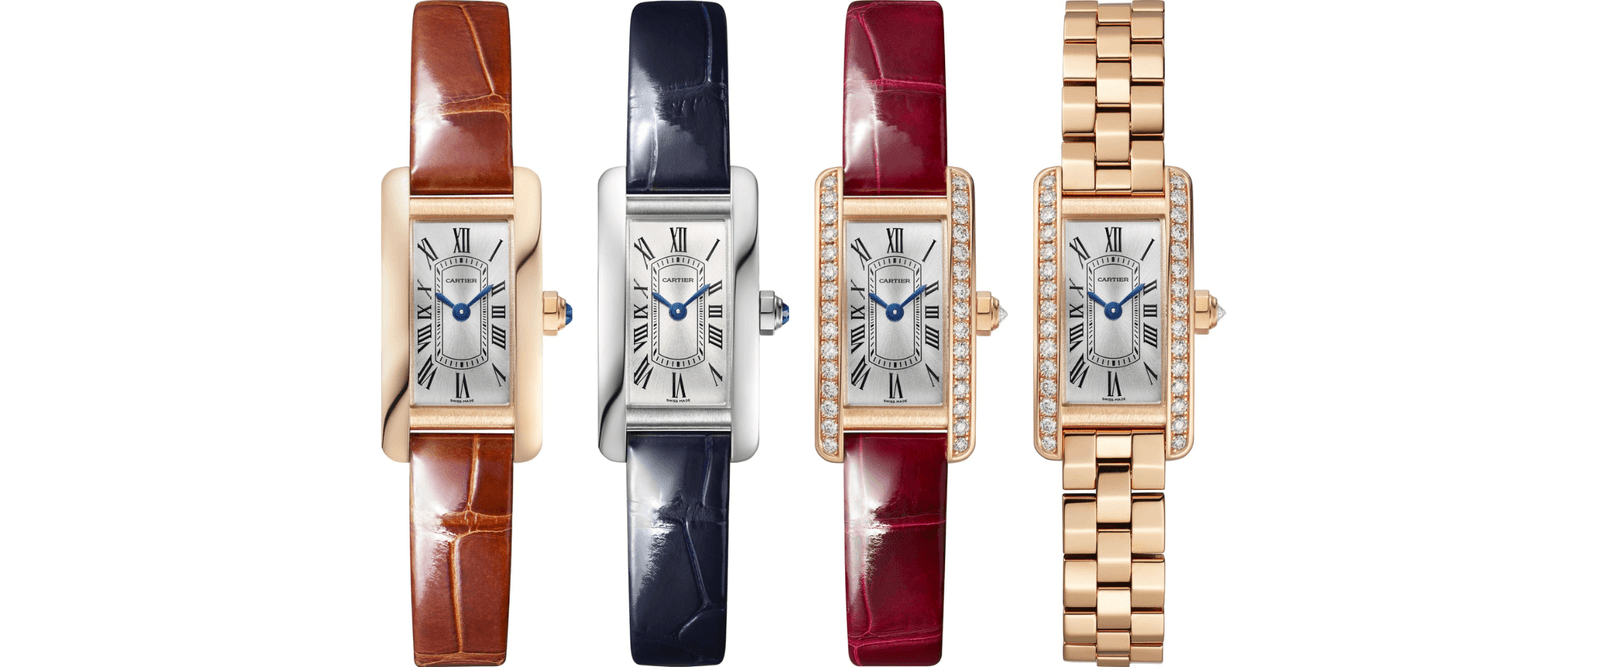 The line-up of the new Tank Américaine watches